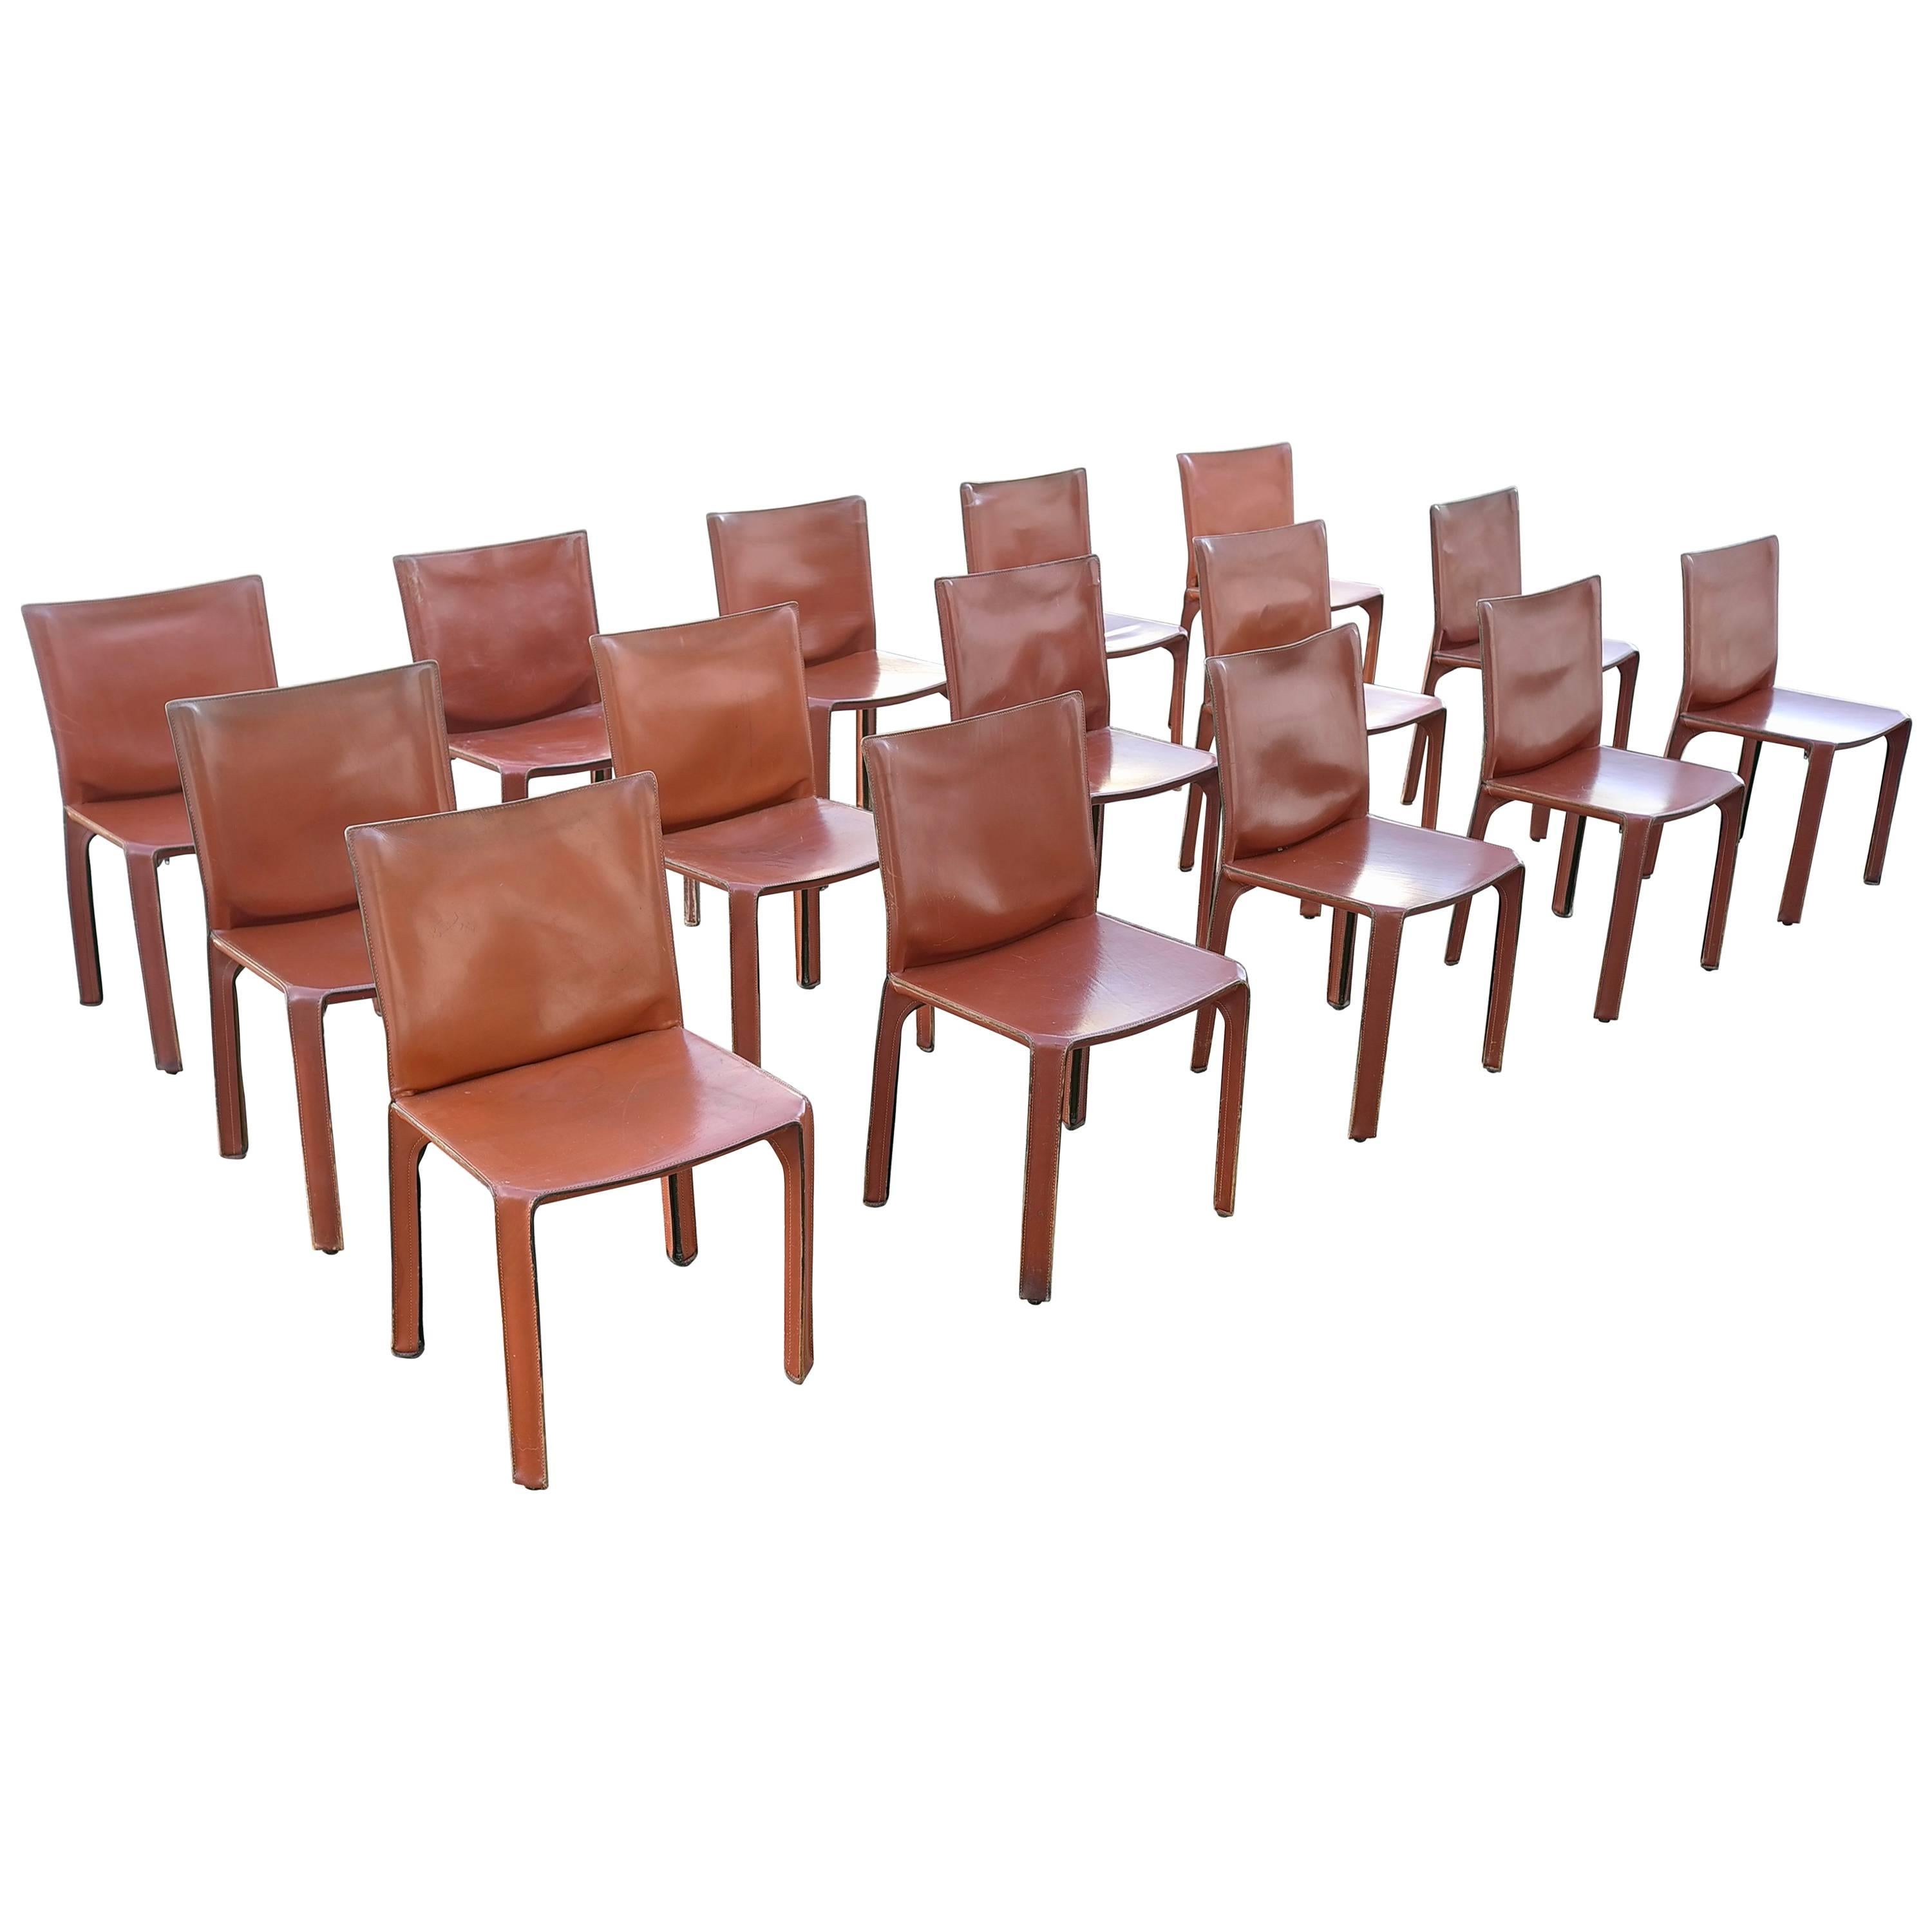 Large Set of 15 Leather 412 Cab Chairs by Mario Bellini for Cassina